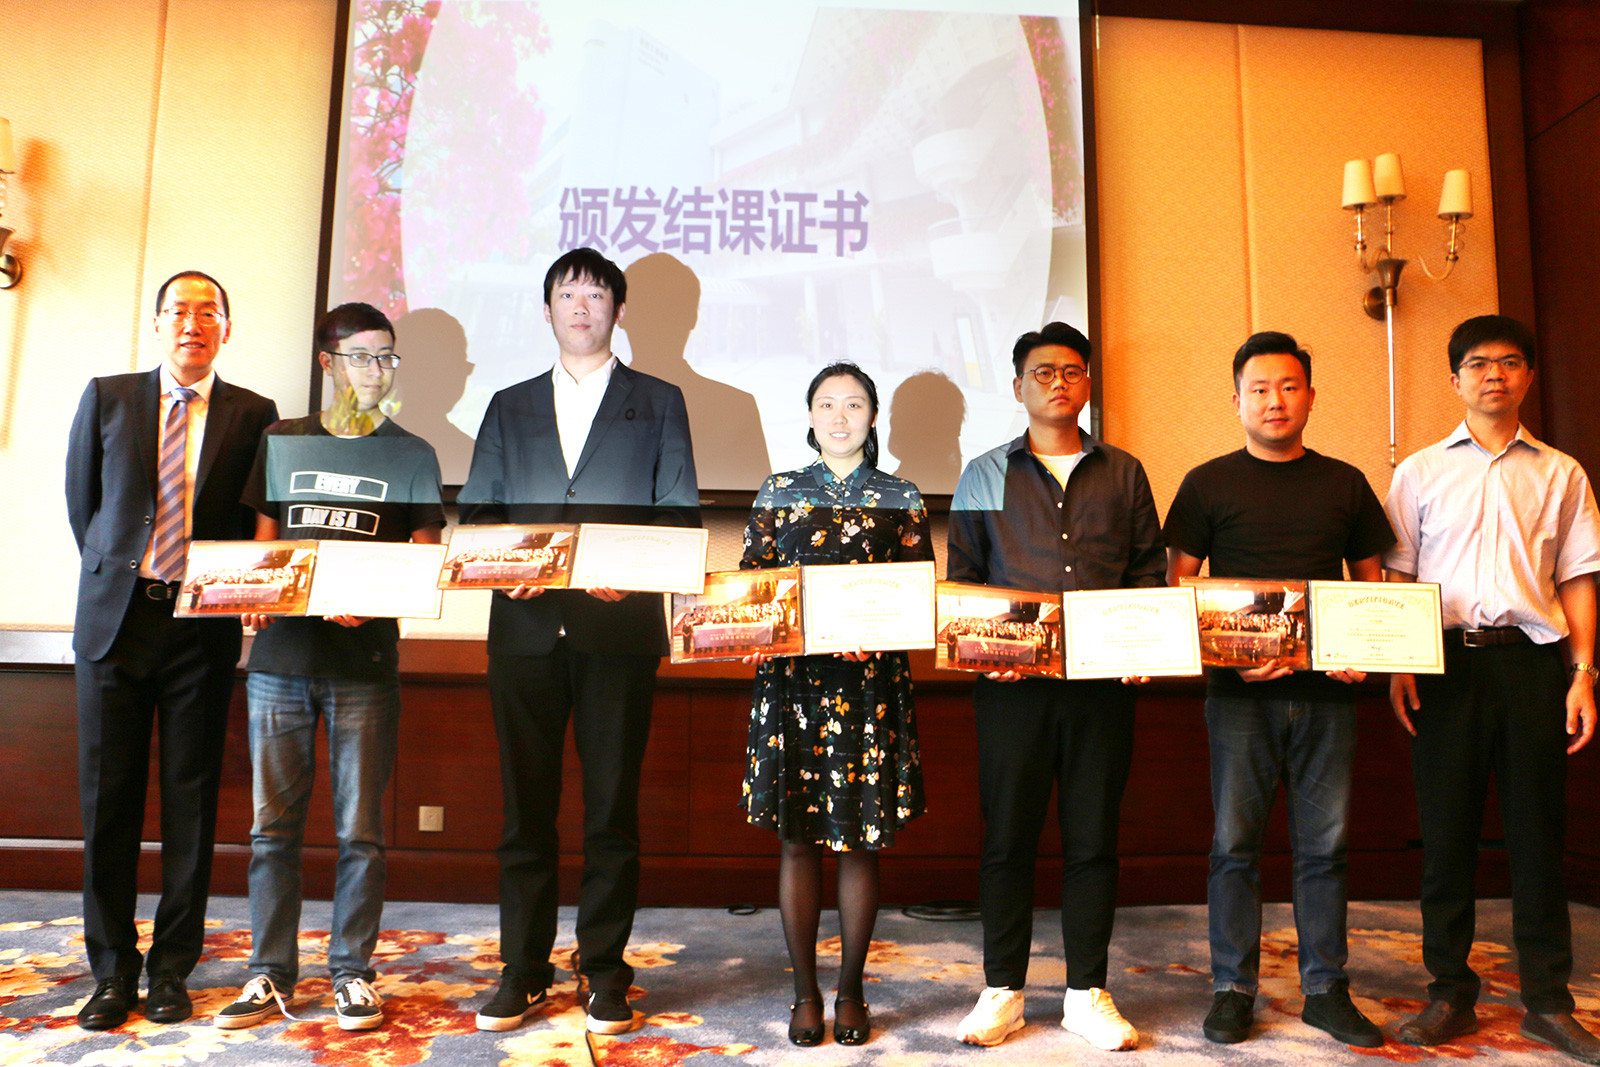 Executive Education Programme for LZY Technology in China